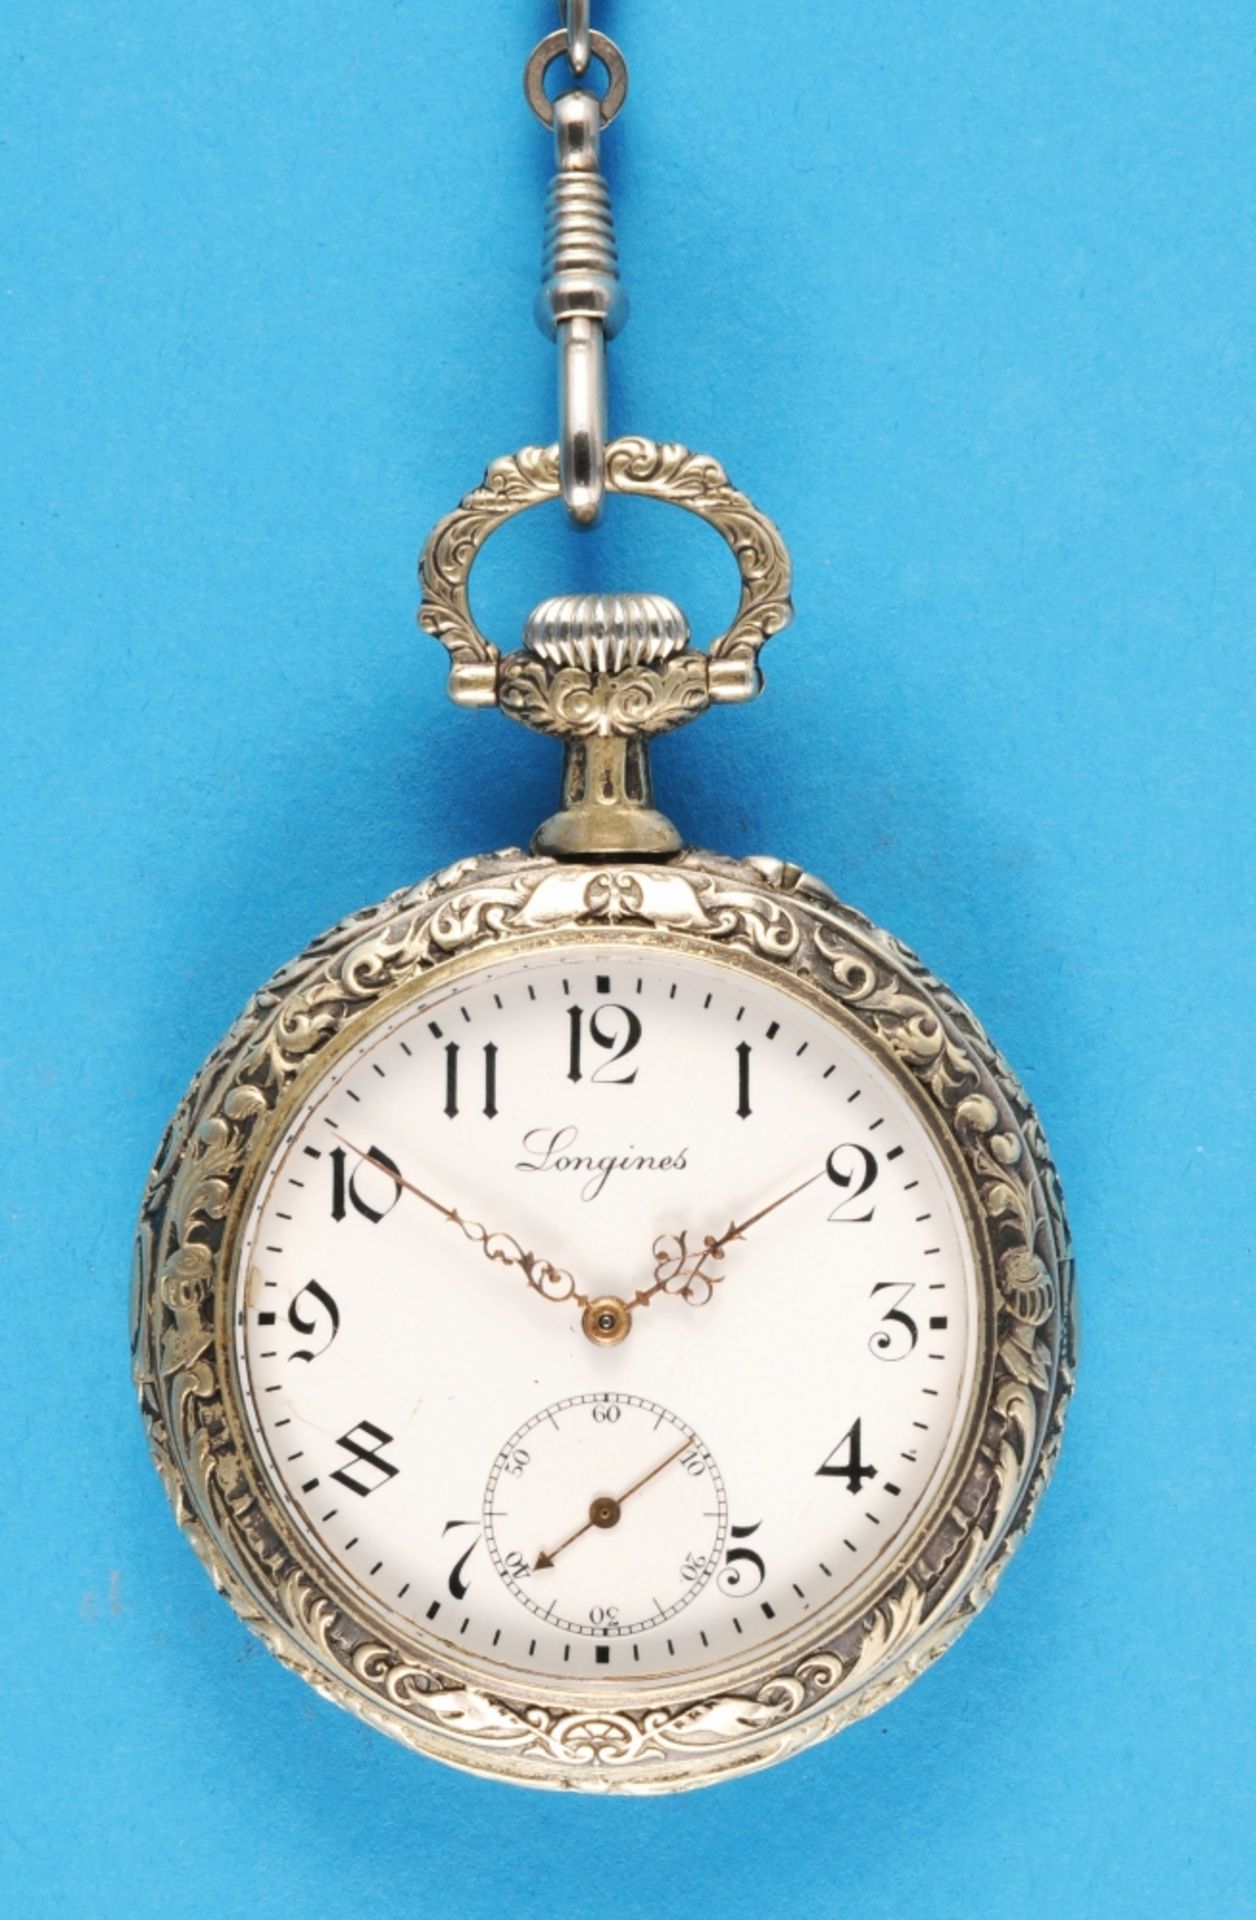 Longines, motif pocket watch with depiction of an eagle, silver-plated case with eagle in relief on